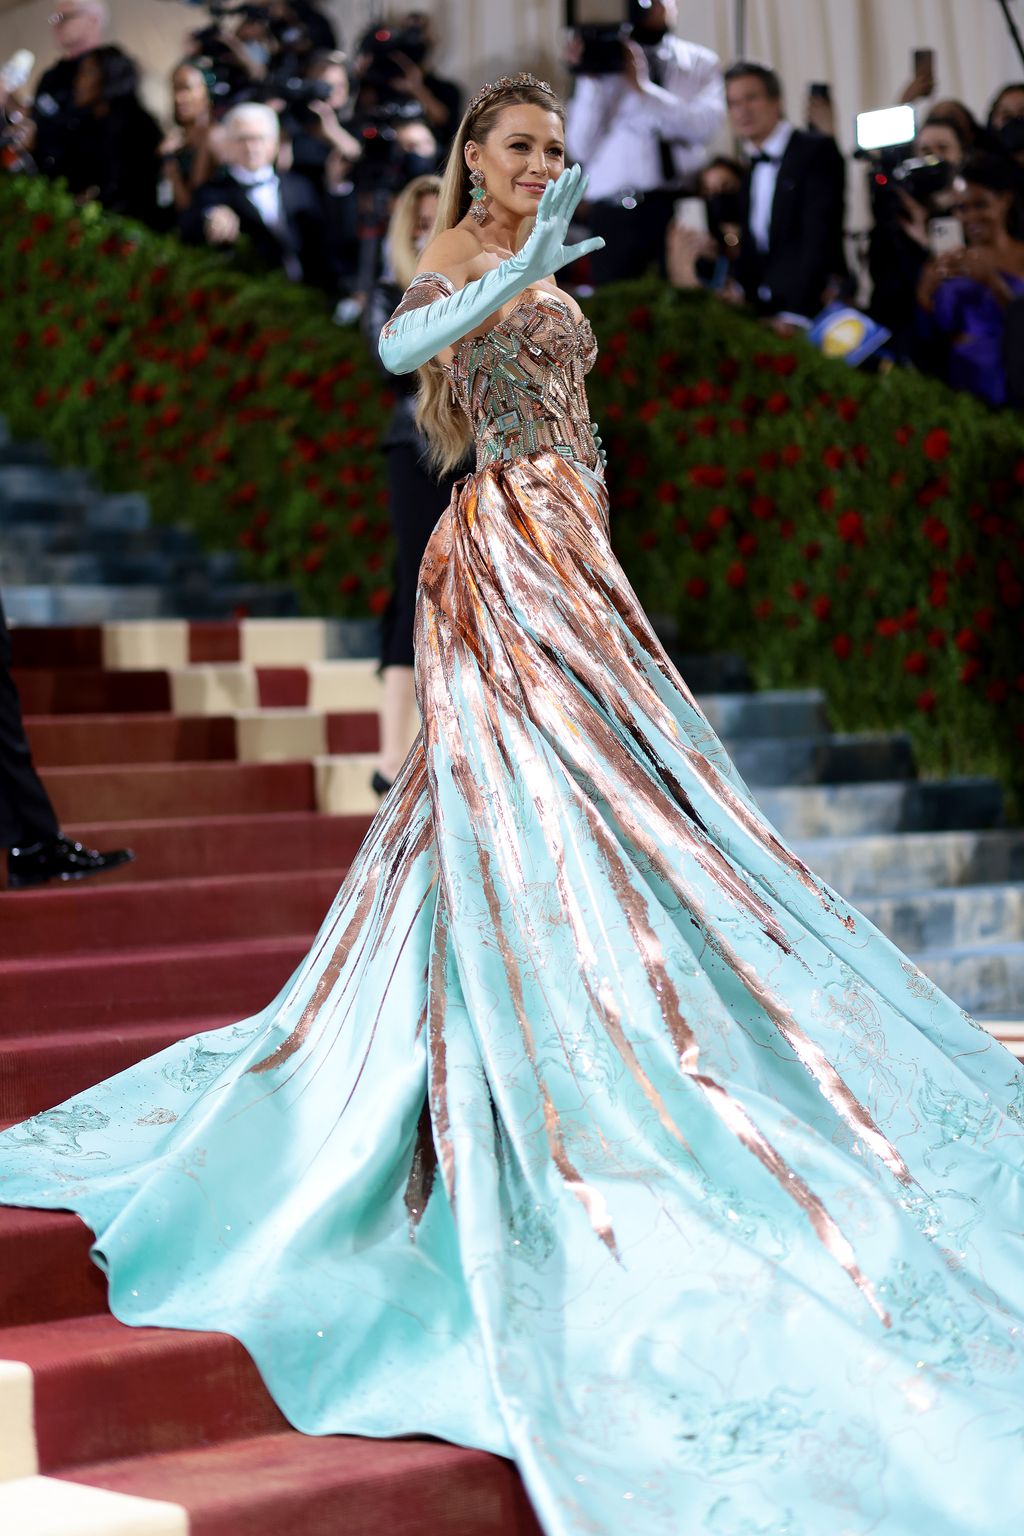 Blake Lively Wore a Color-Changing Gown to the 2022 Met Gala | Marie Claire